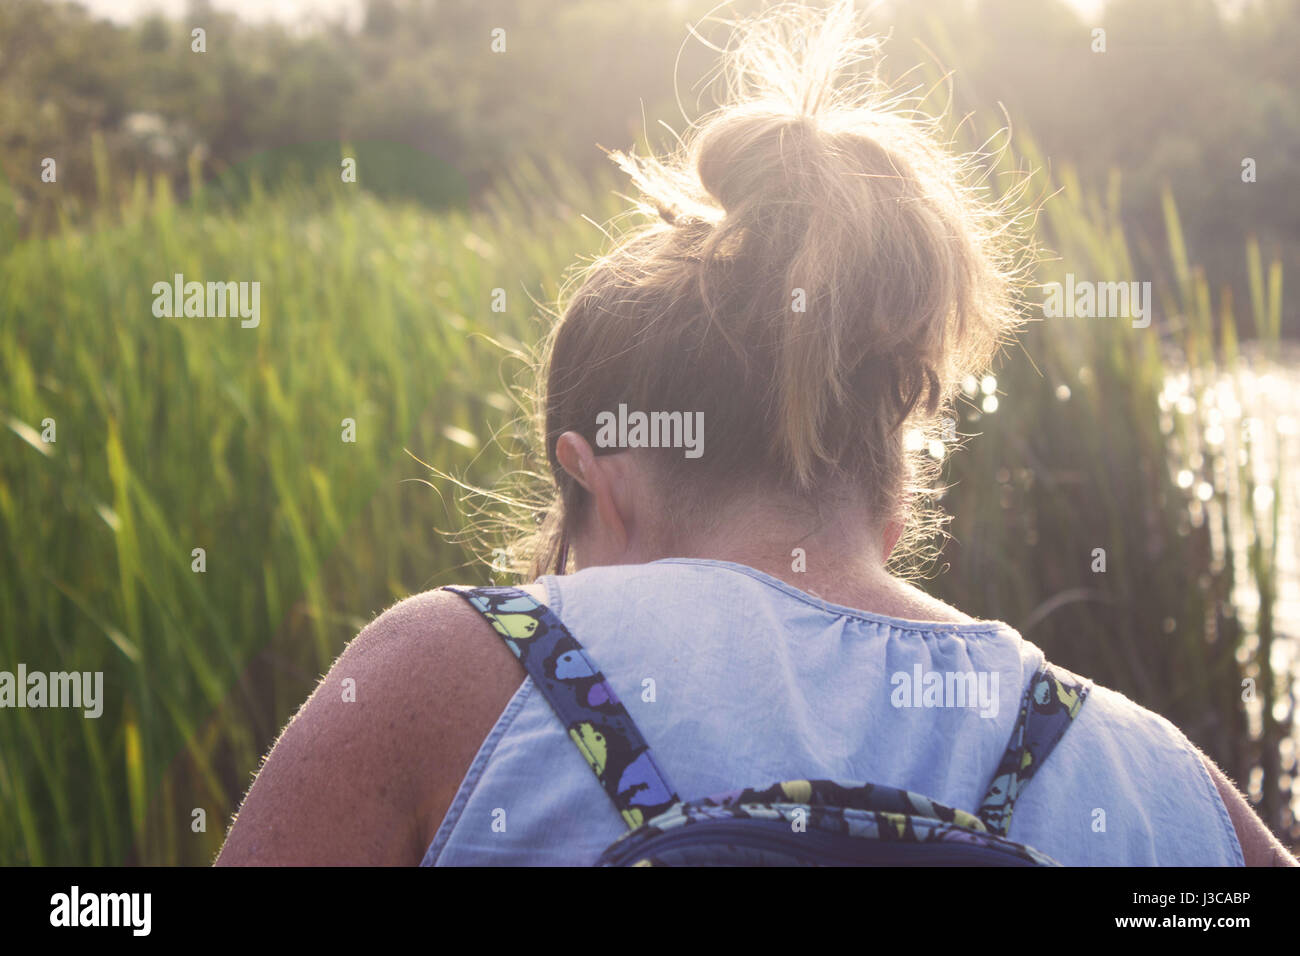 Woman exploring in the grass. Stock Photo